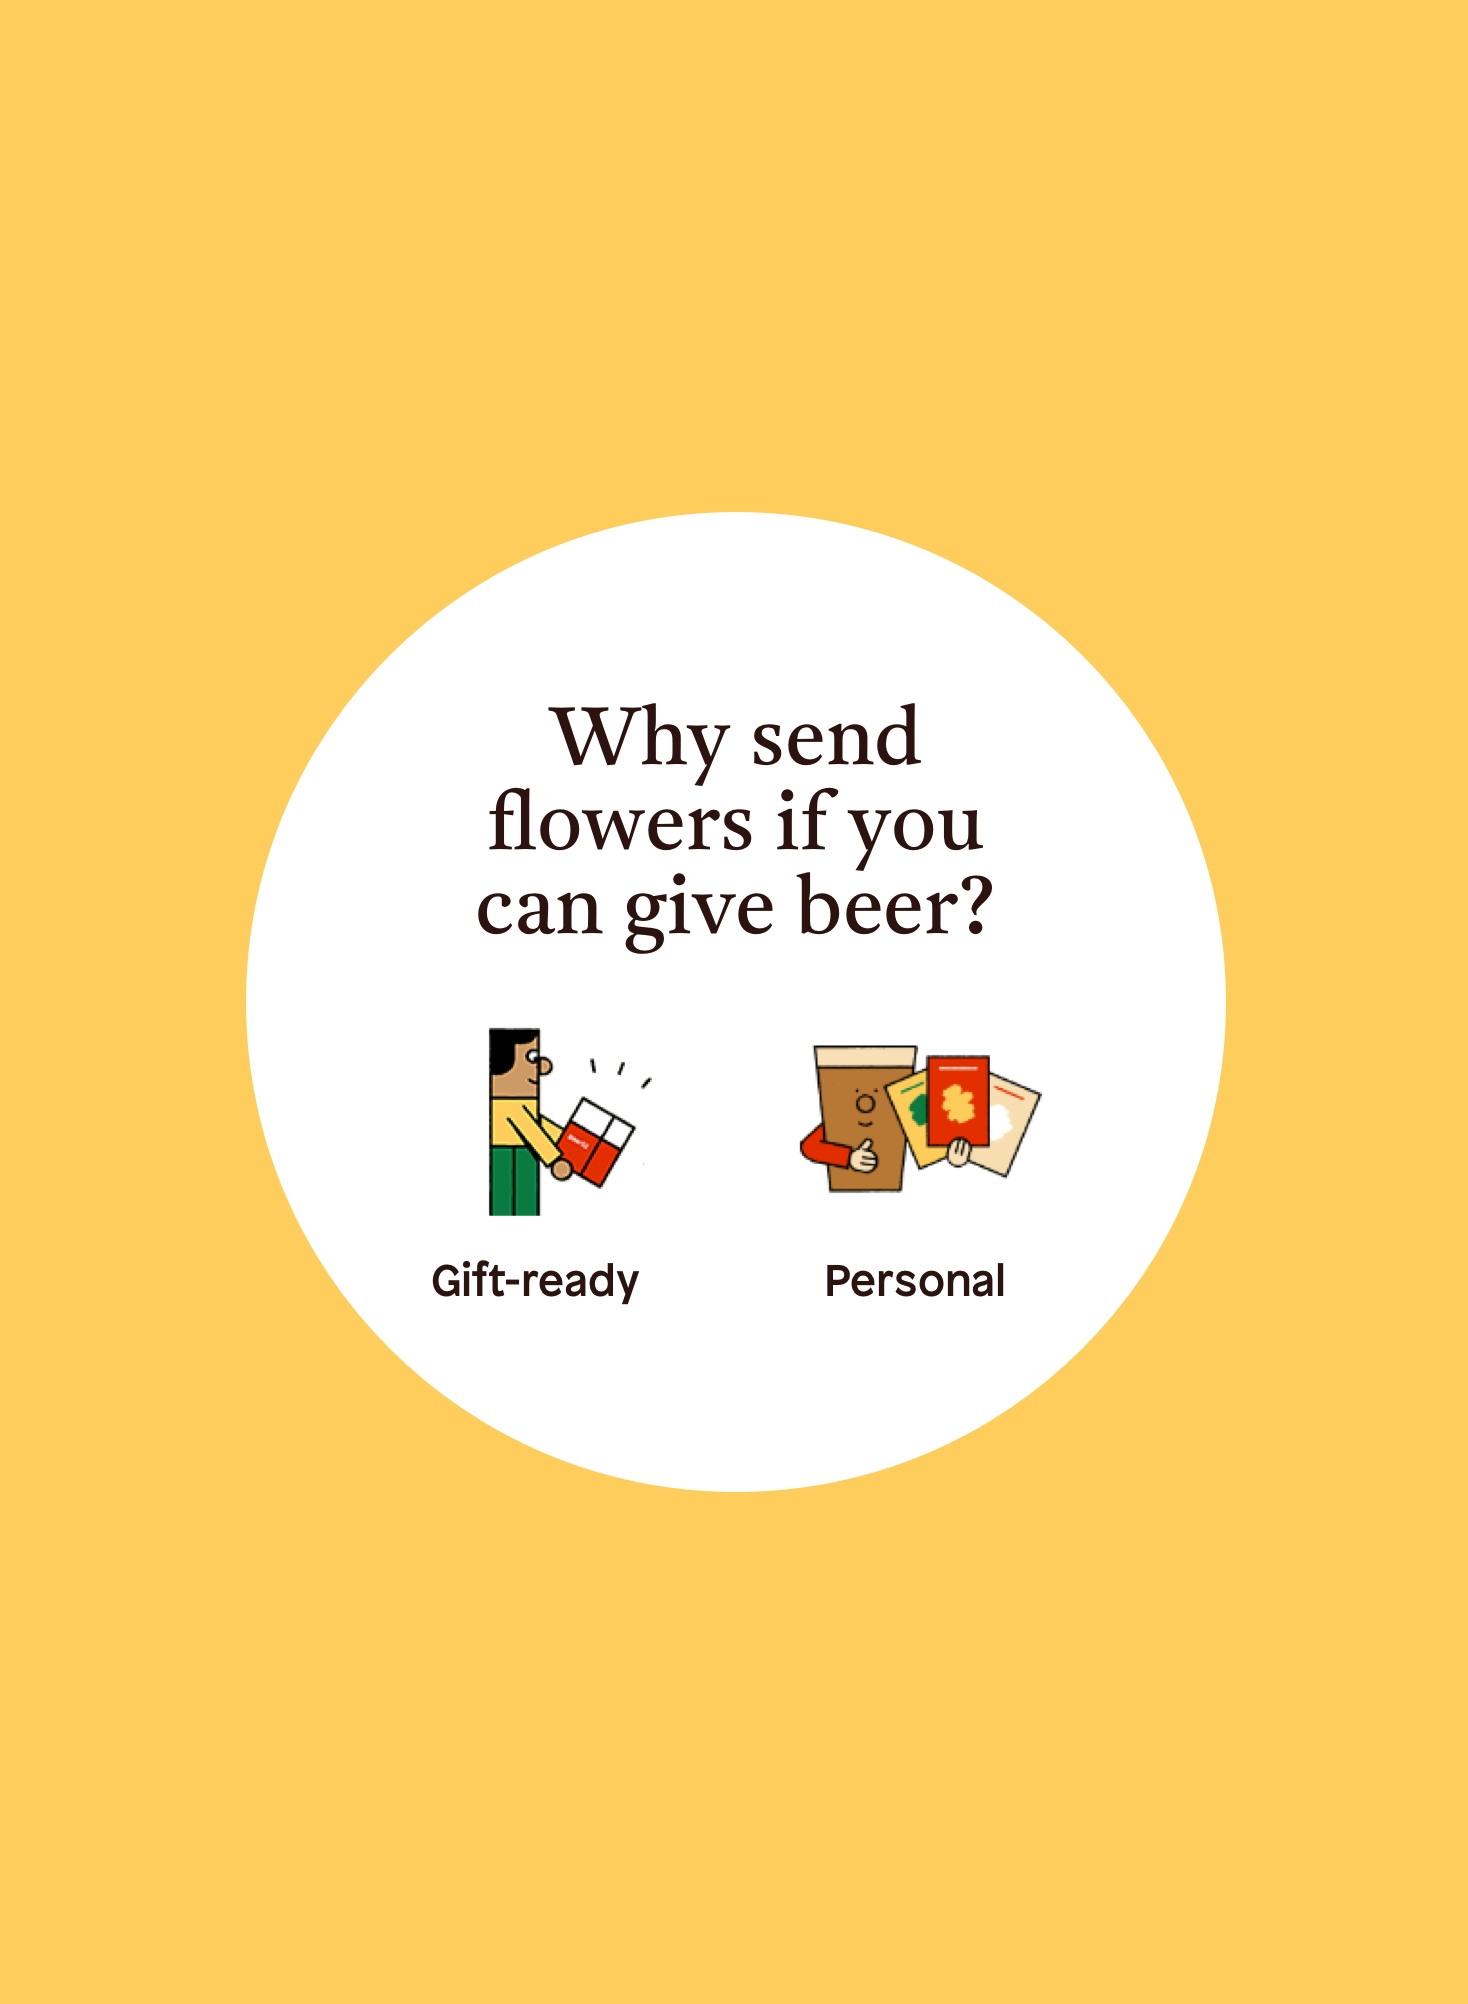 A yellow background with a white circle in the foreground. Inside the circle is the question “Why send flowers when you can send beer?” and featured two illustrations of a character and and a anthropomorphised pint